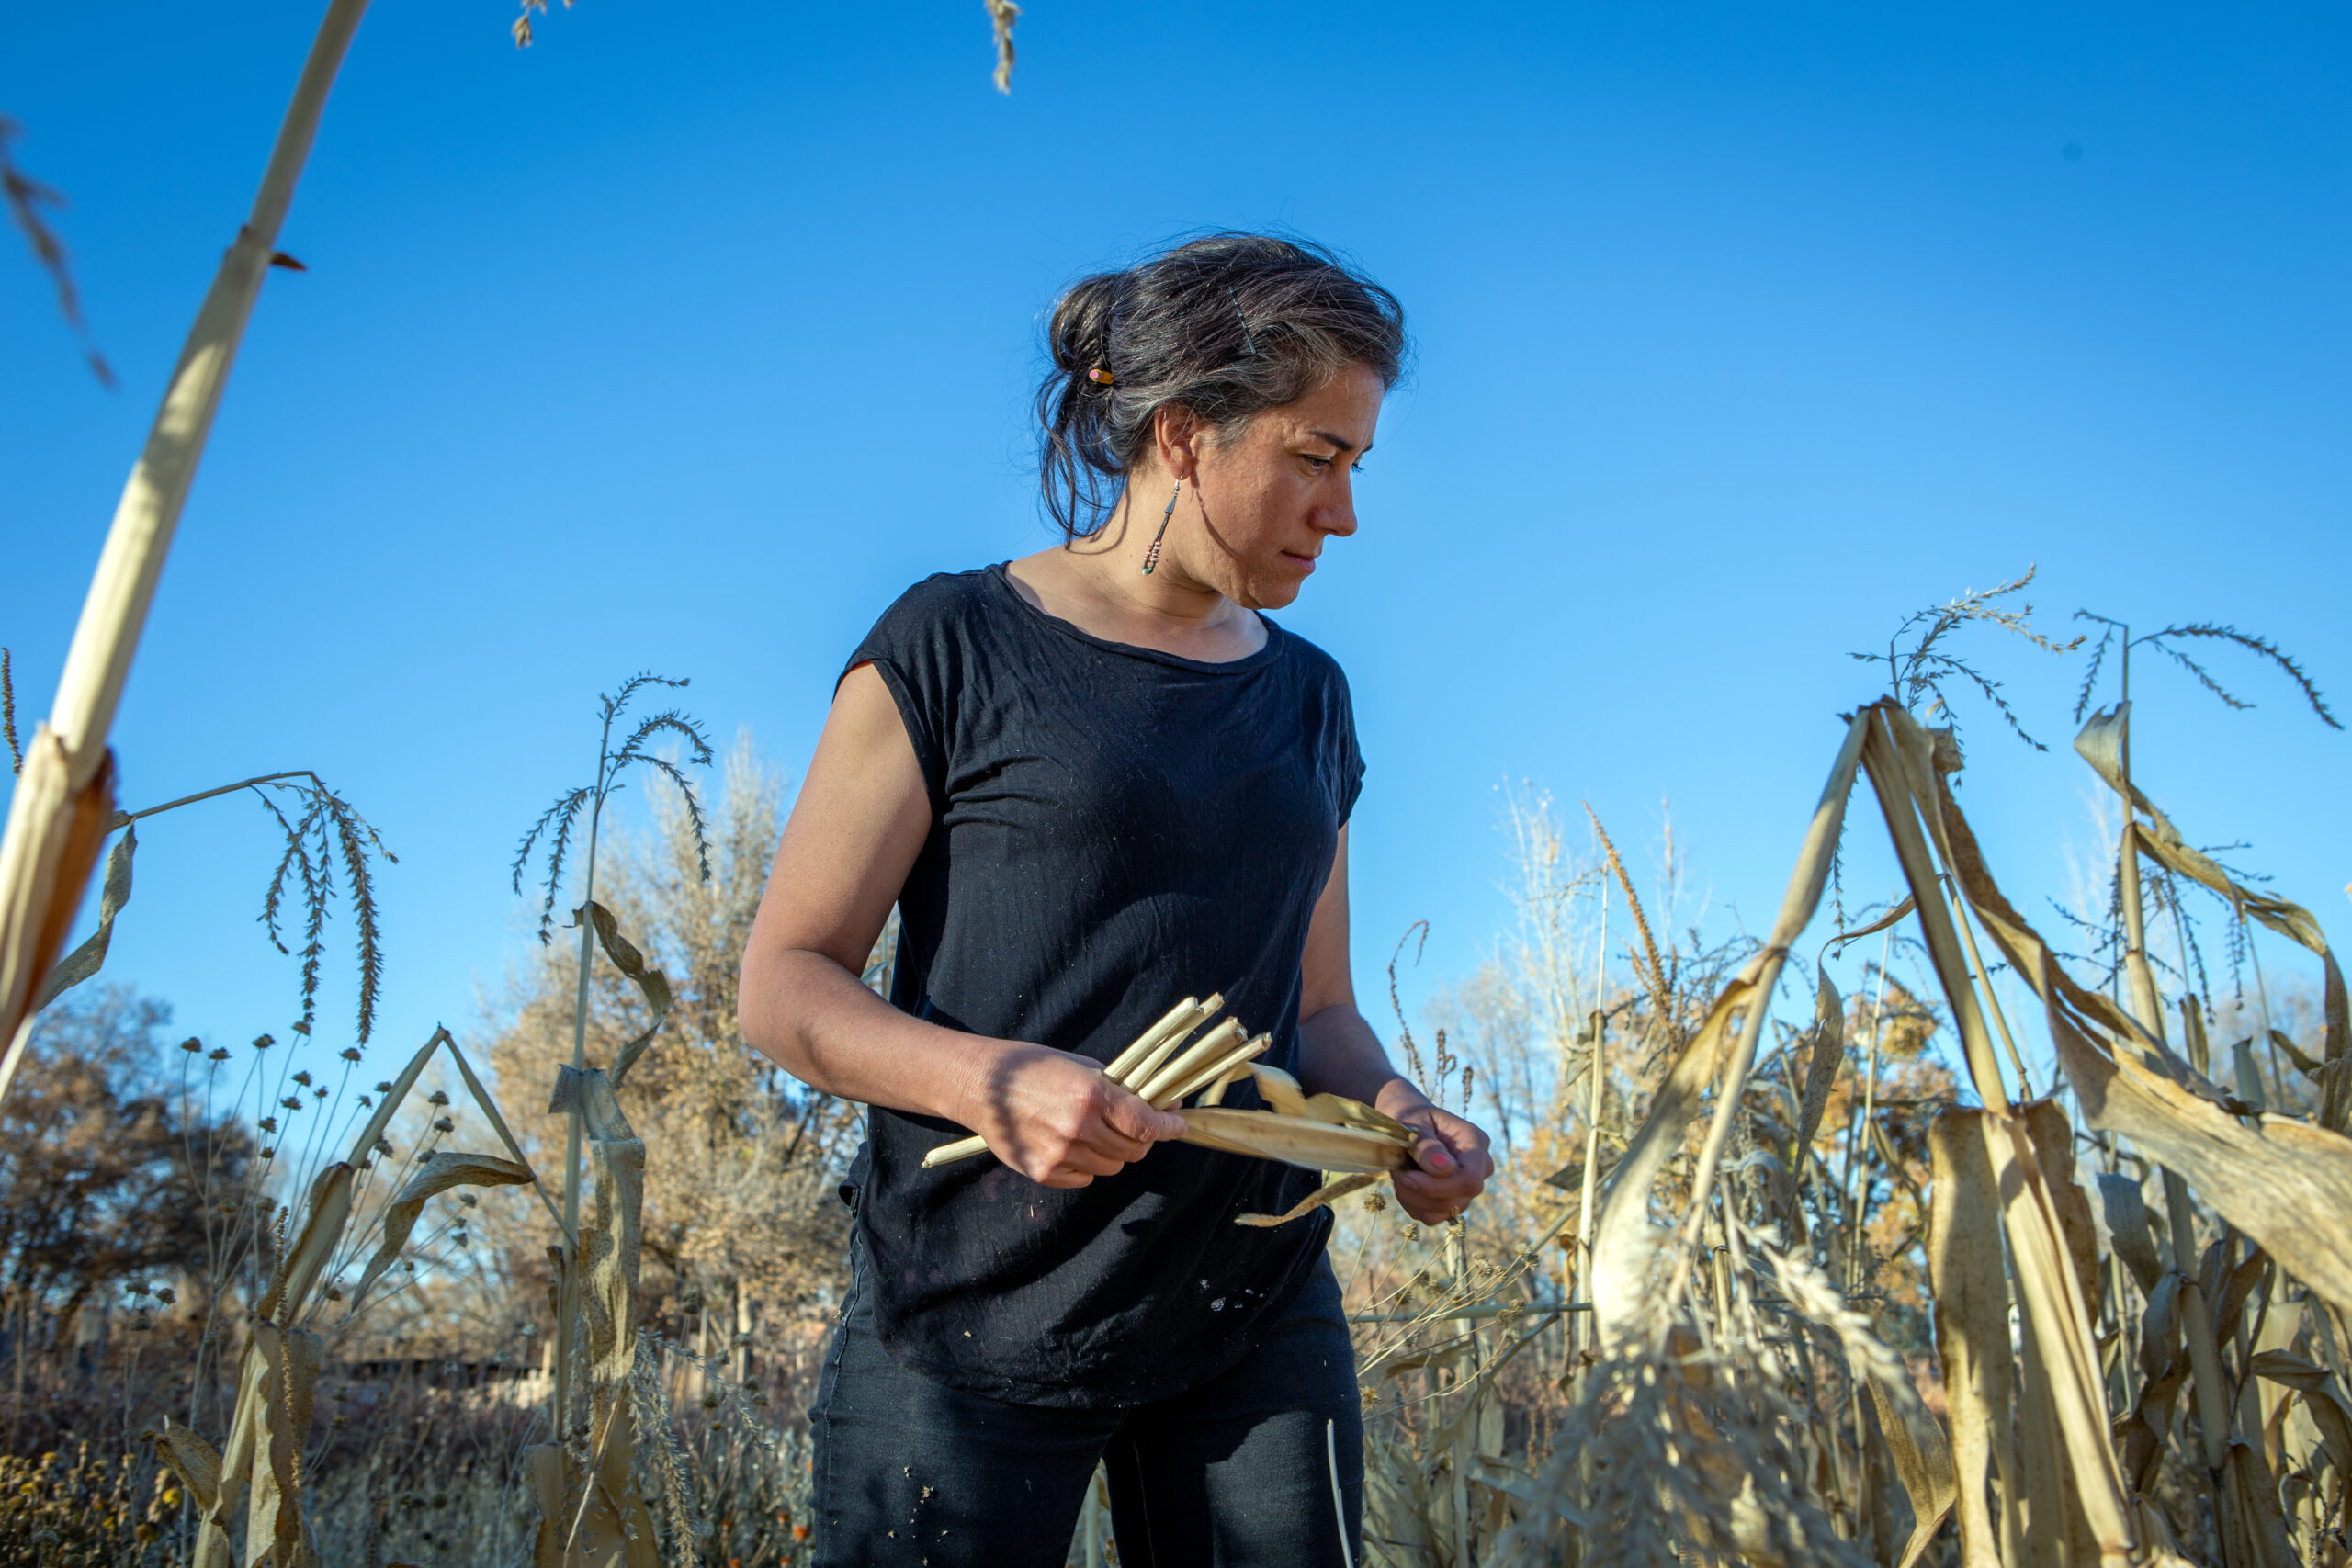 A woman wearing a black top and black jeans stands in a field holding corn stock in her hands.